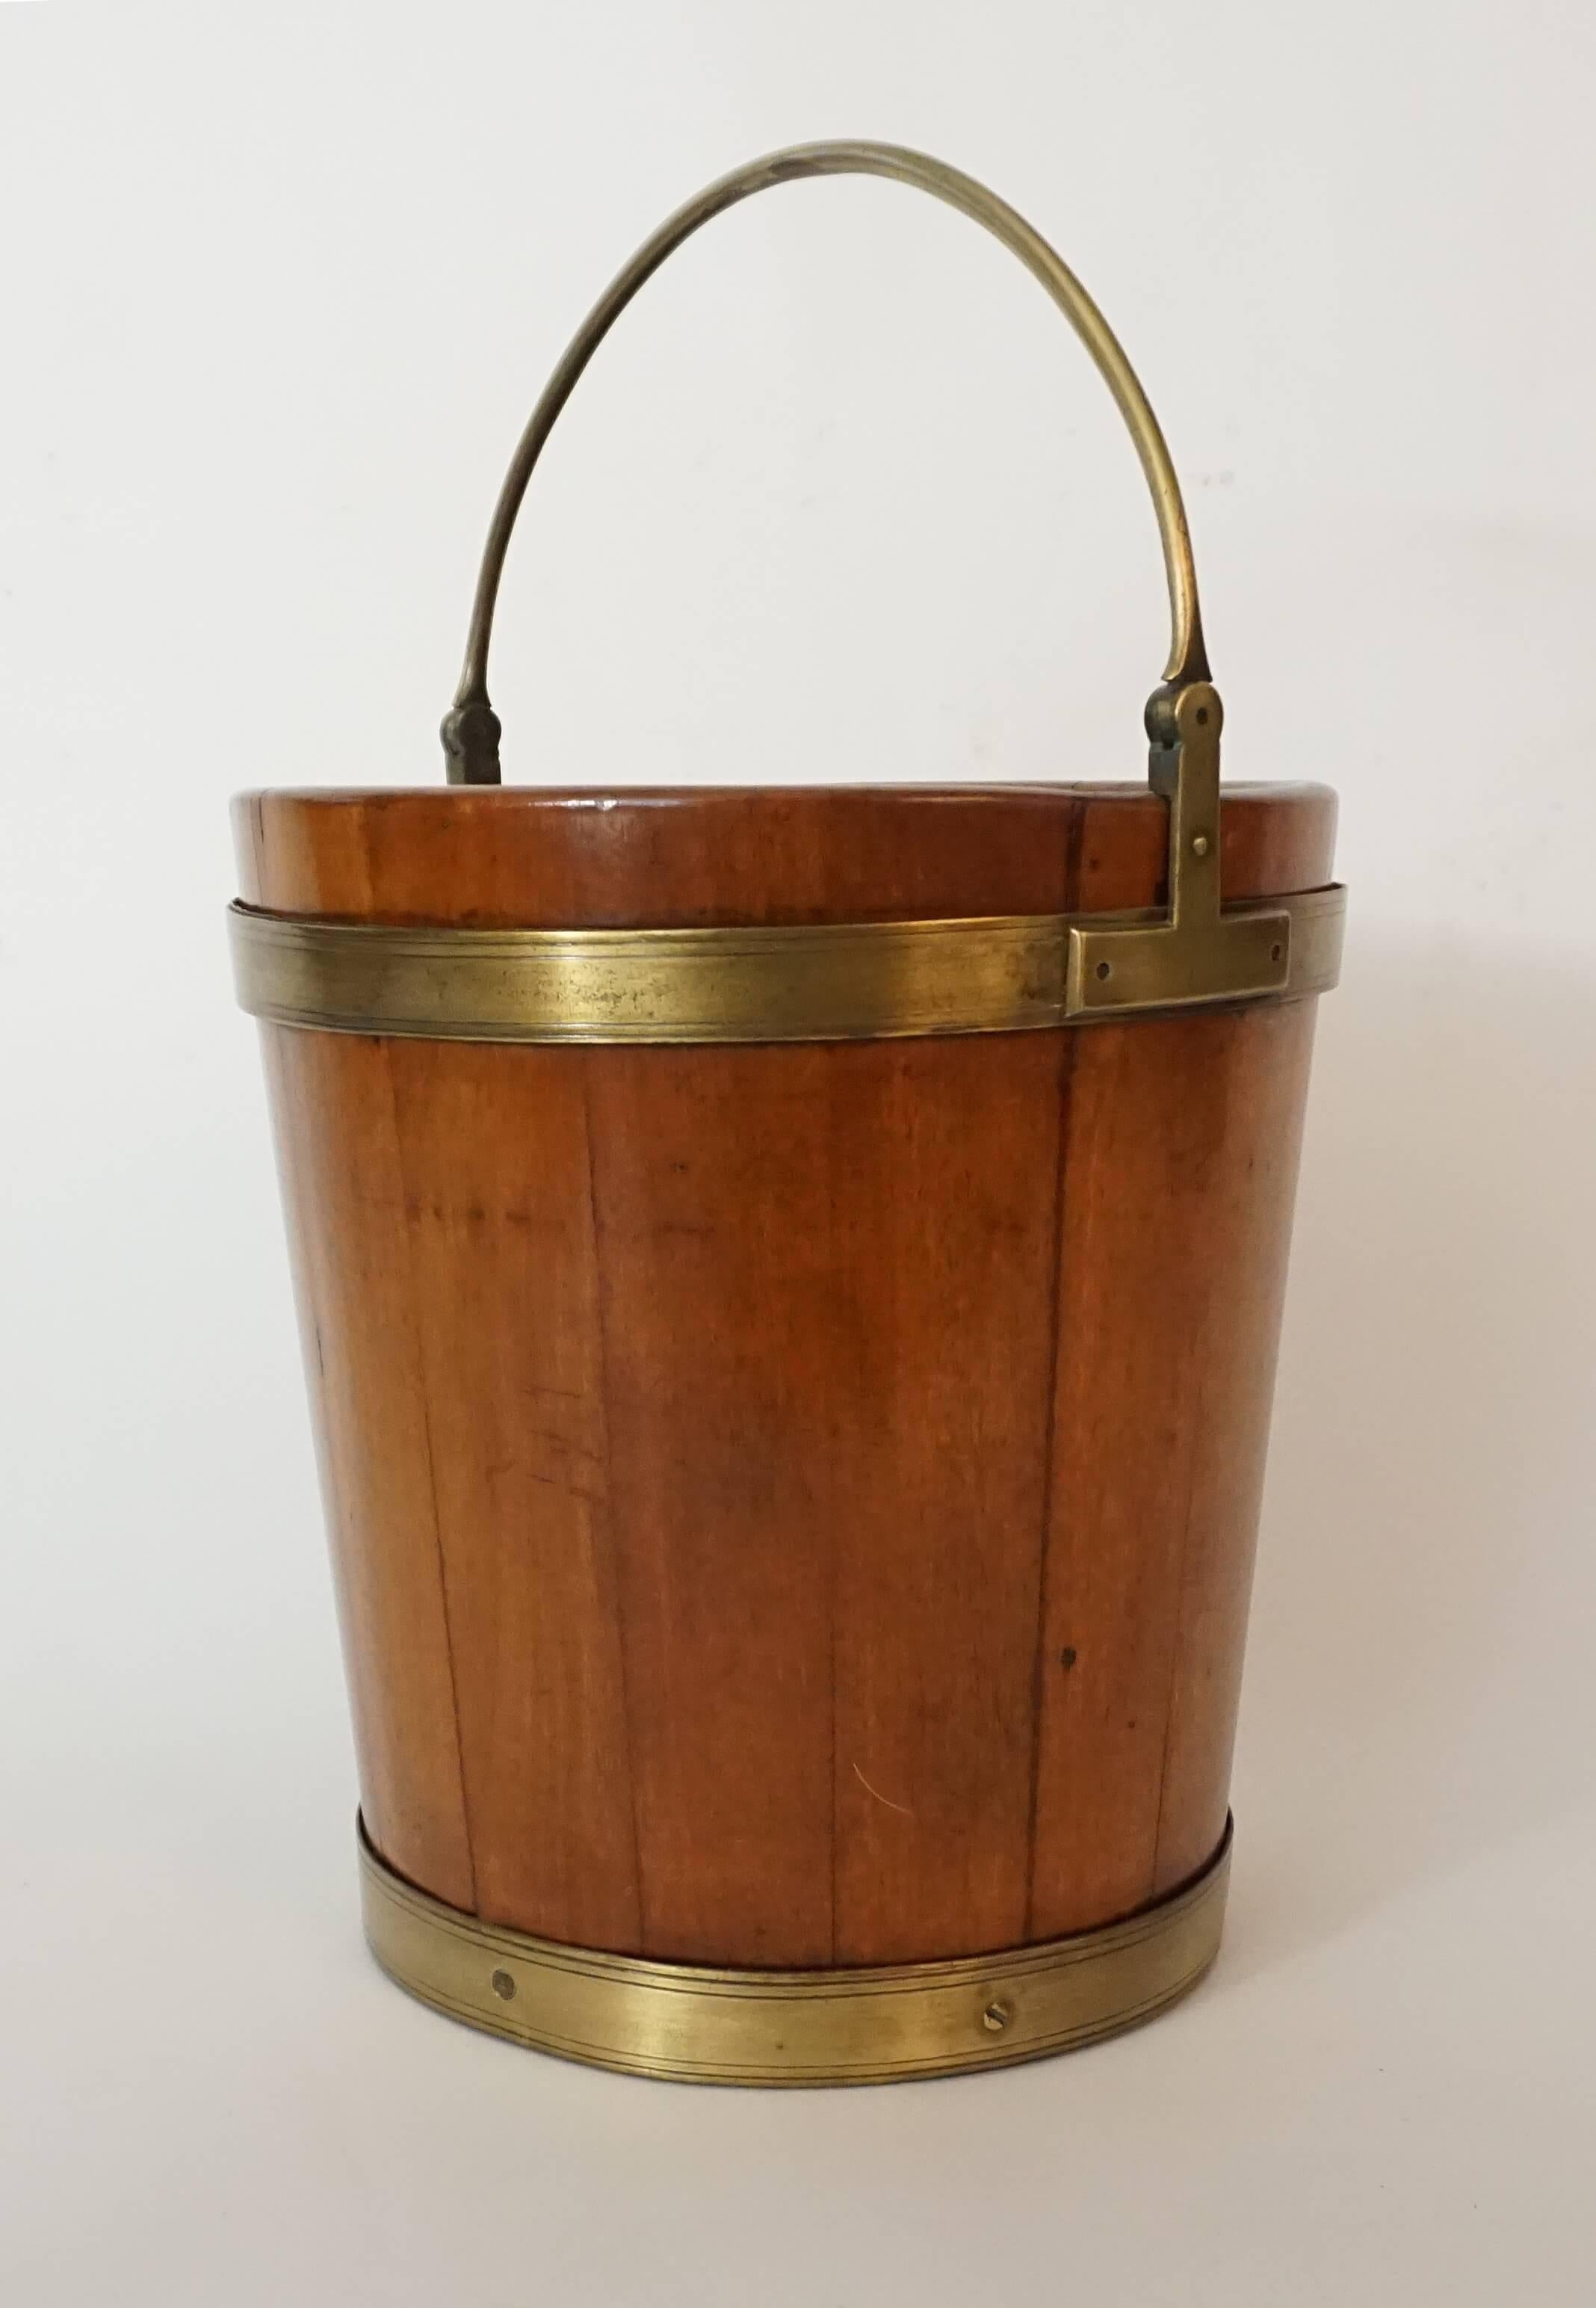 Irish George III circa 1780 peat, turf, or kindling bucket of solid blonde mahogany stave construction and round tapering form with brass banding and pivoting handle. Measurements: 25